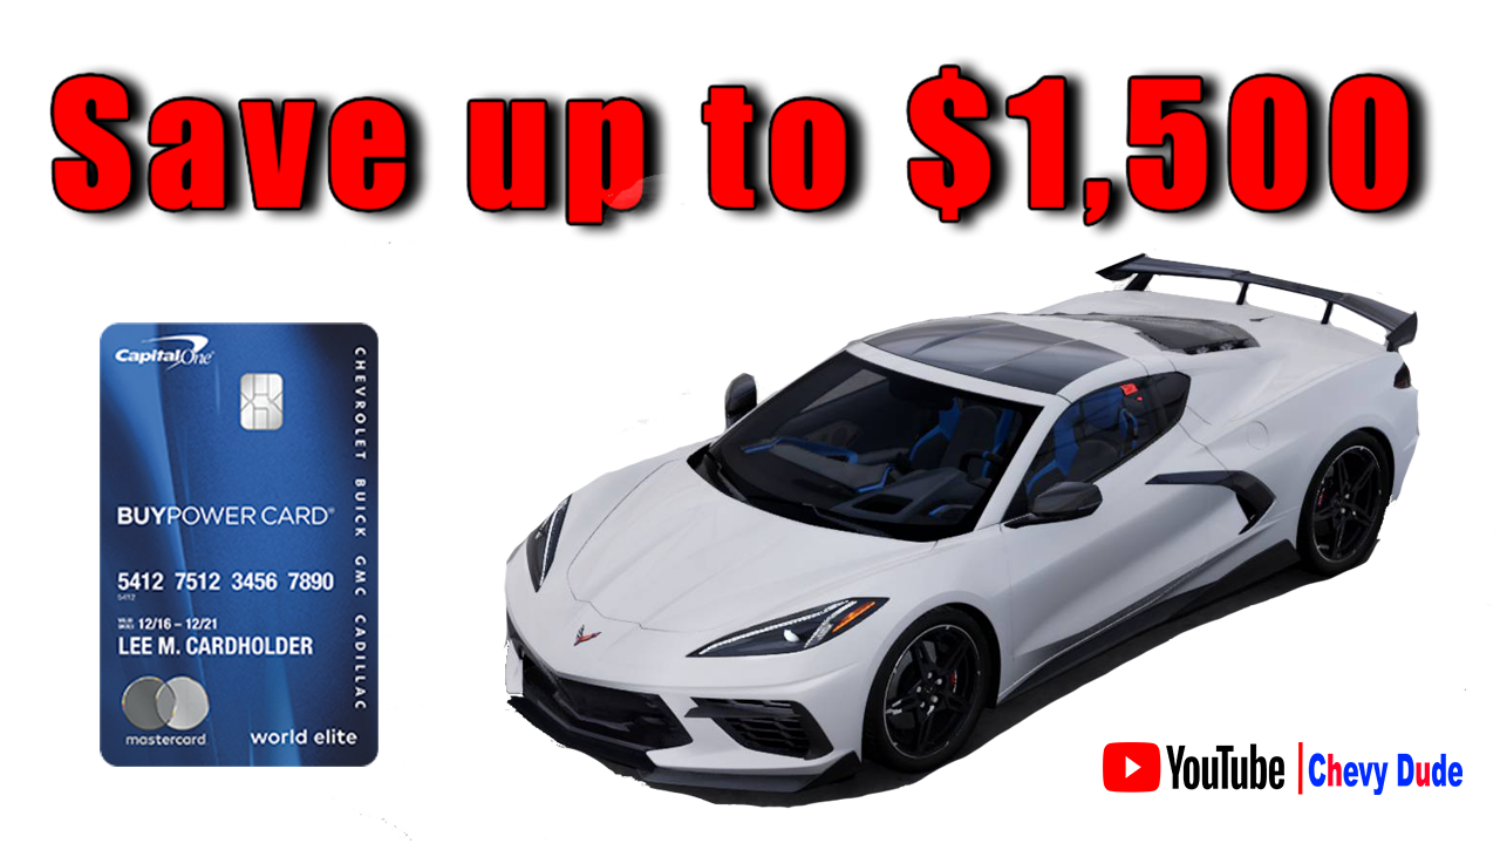 chevy-offers-rebate-on-2020-corvette-chevy-dude